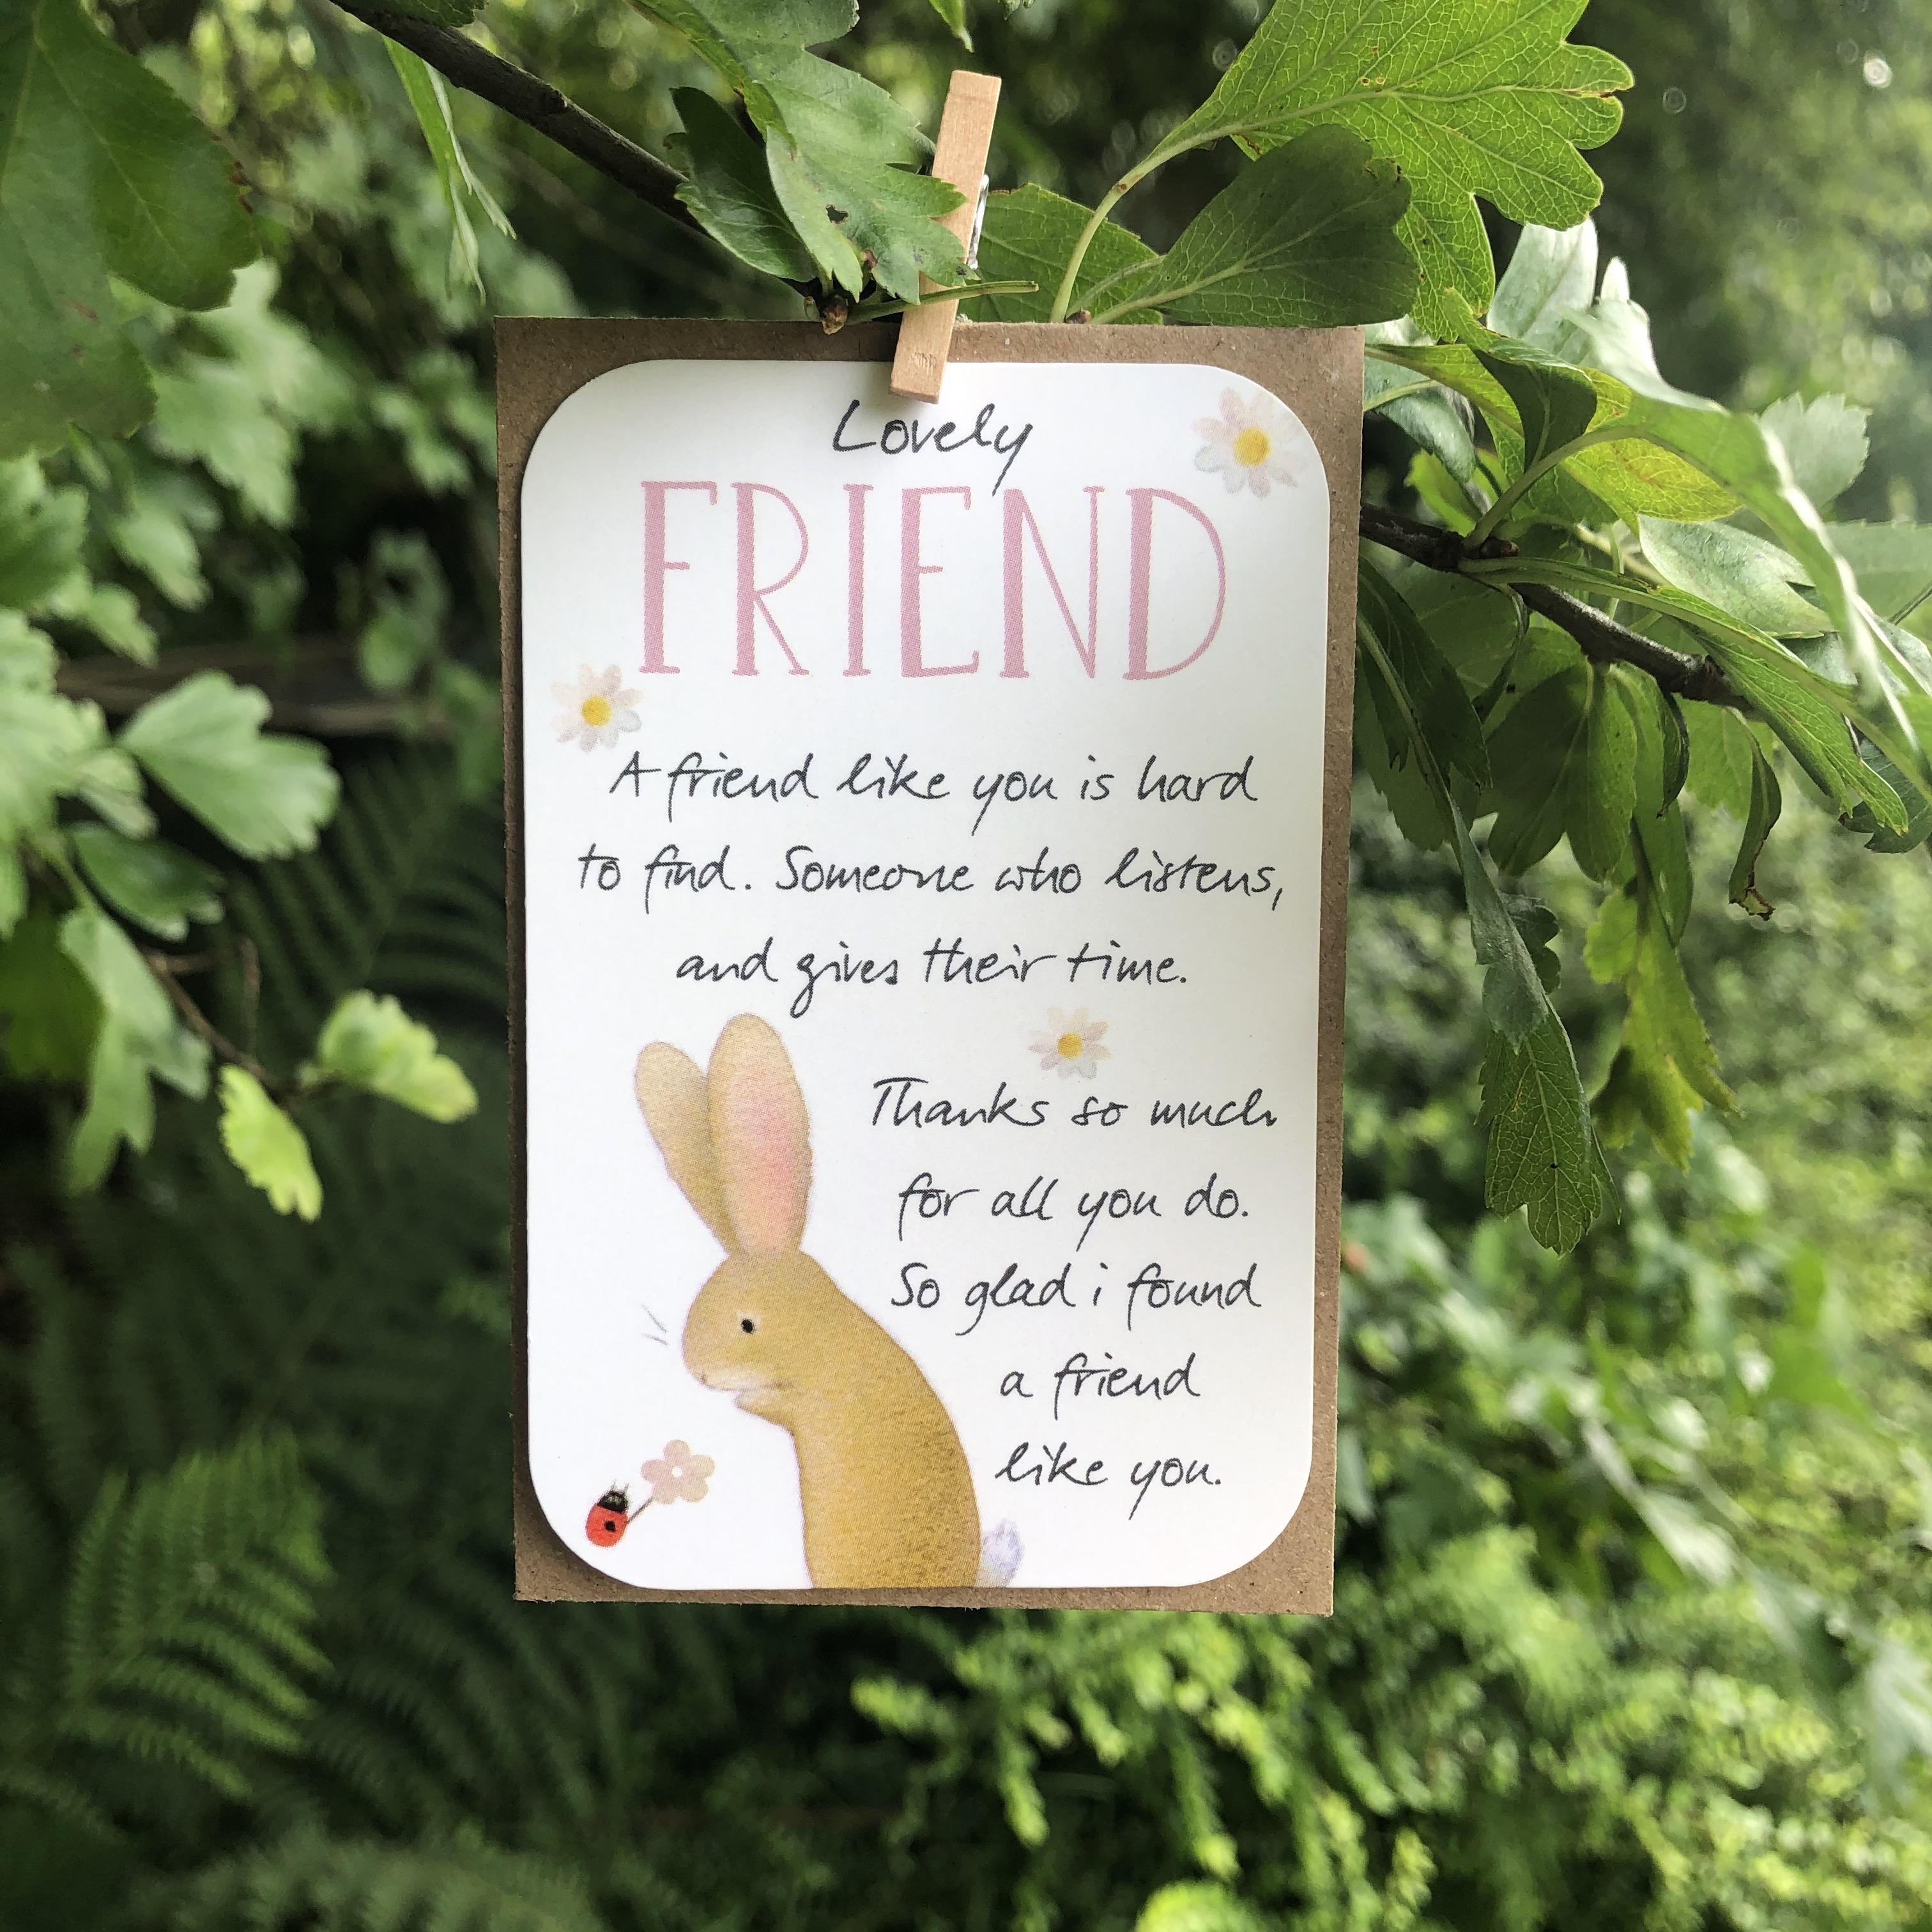 A small keepsake card with a 'Lovely Friend' caption, and lovely little verse